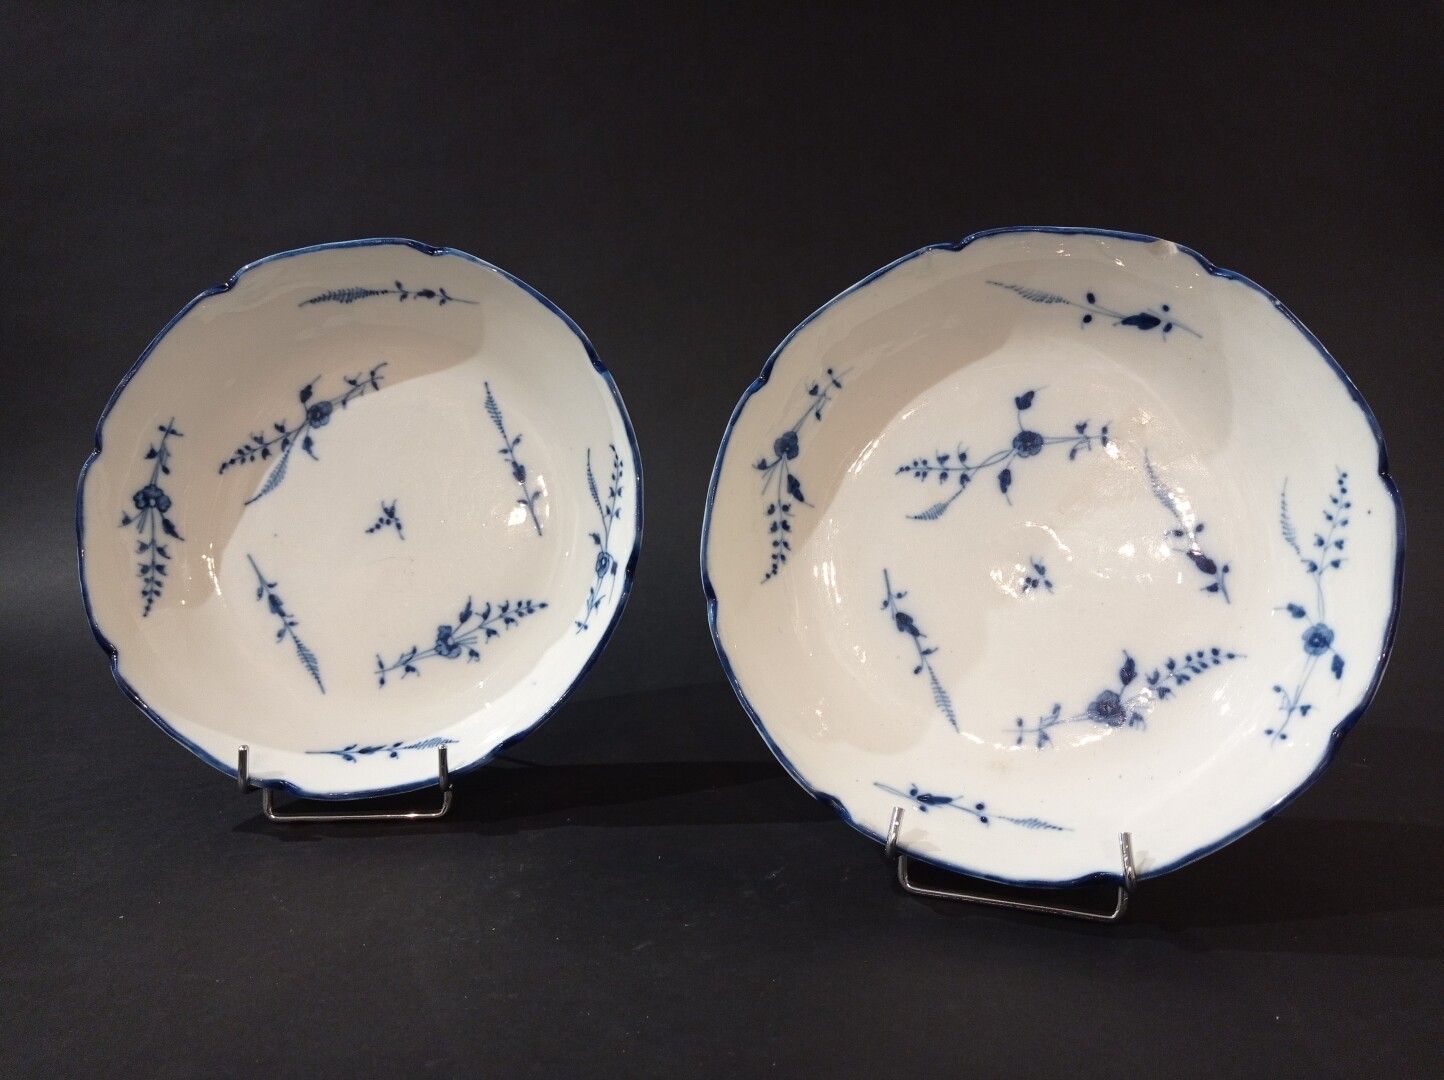 Null CHANTILLY, 18th century

Pair of large porcelain bowls with twig decoration&hellip;